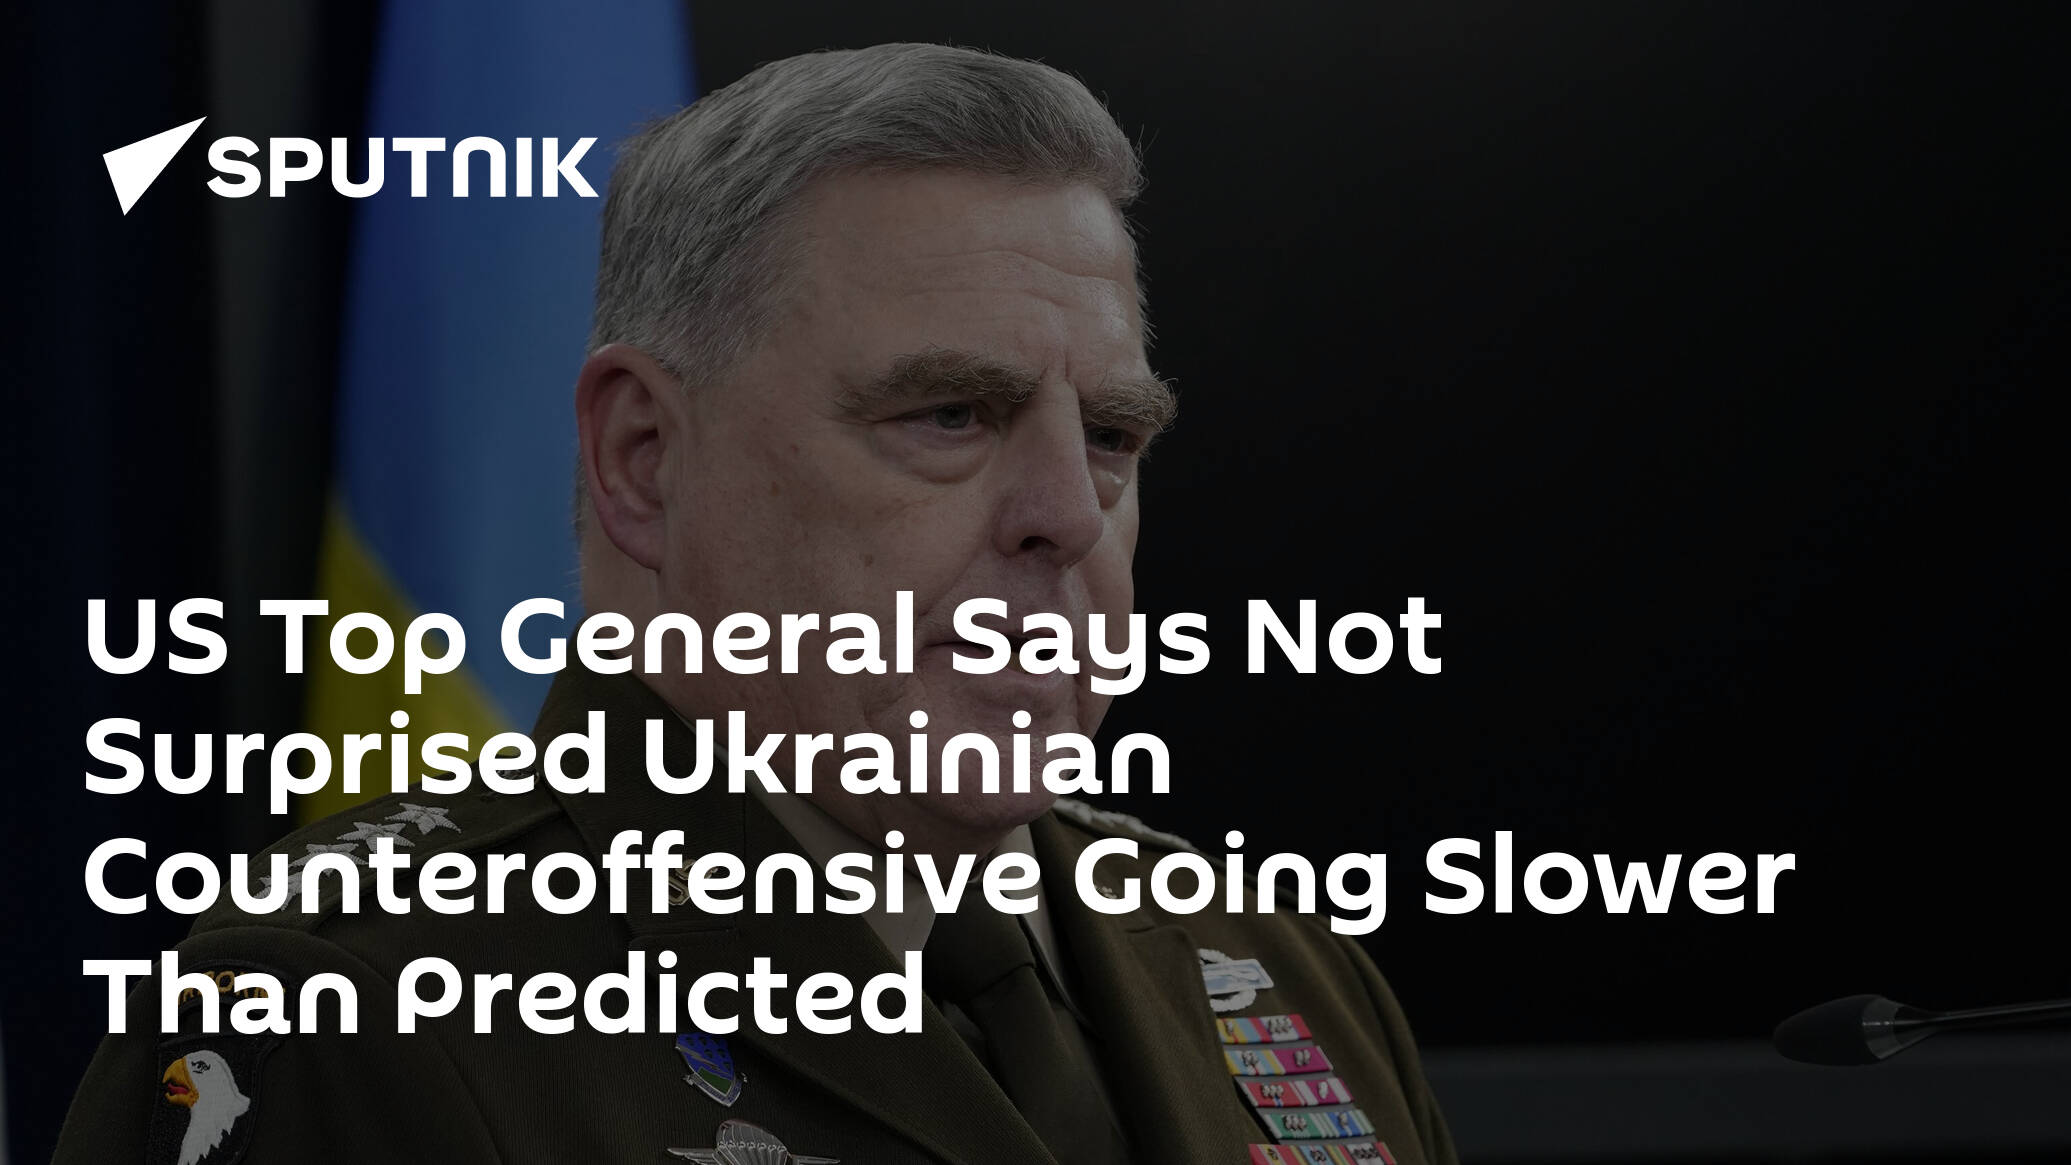 US Top General Says Not Surprised Ukrainian Counteroffensive Going Slower Than Predicted